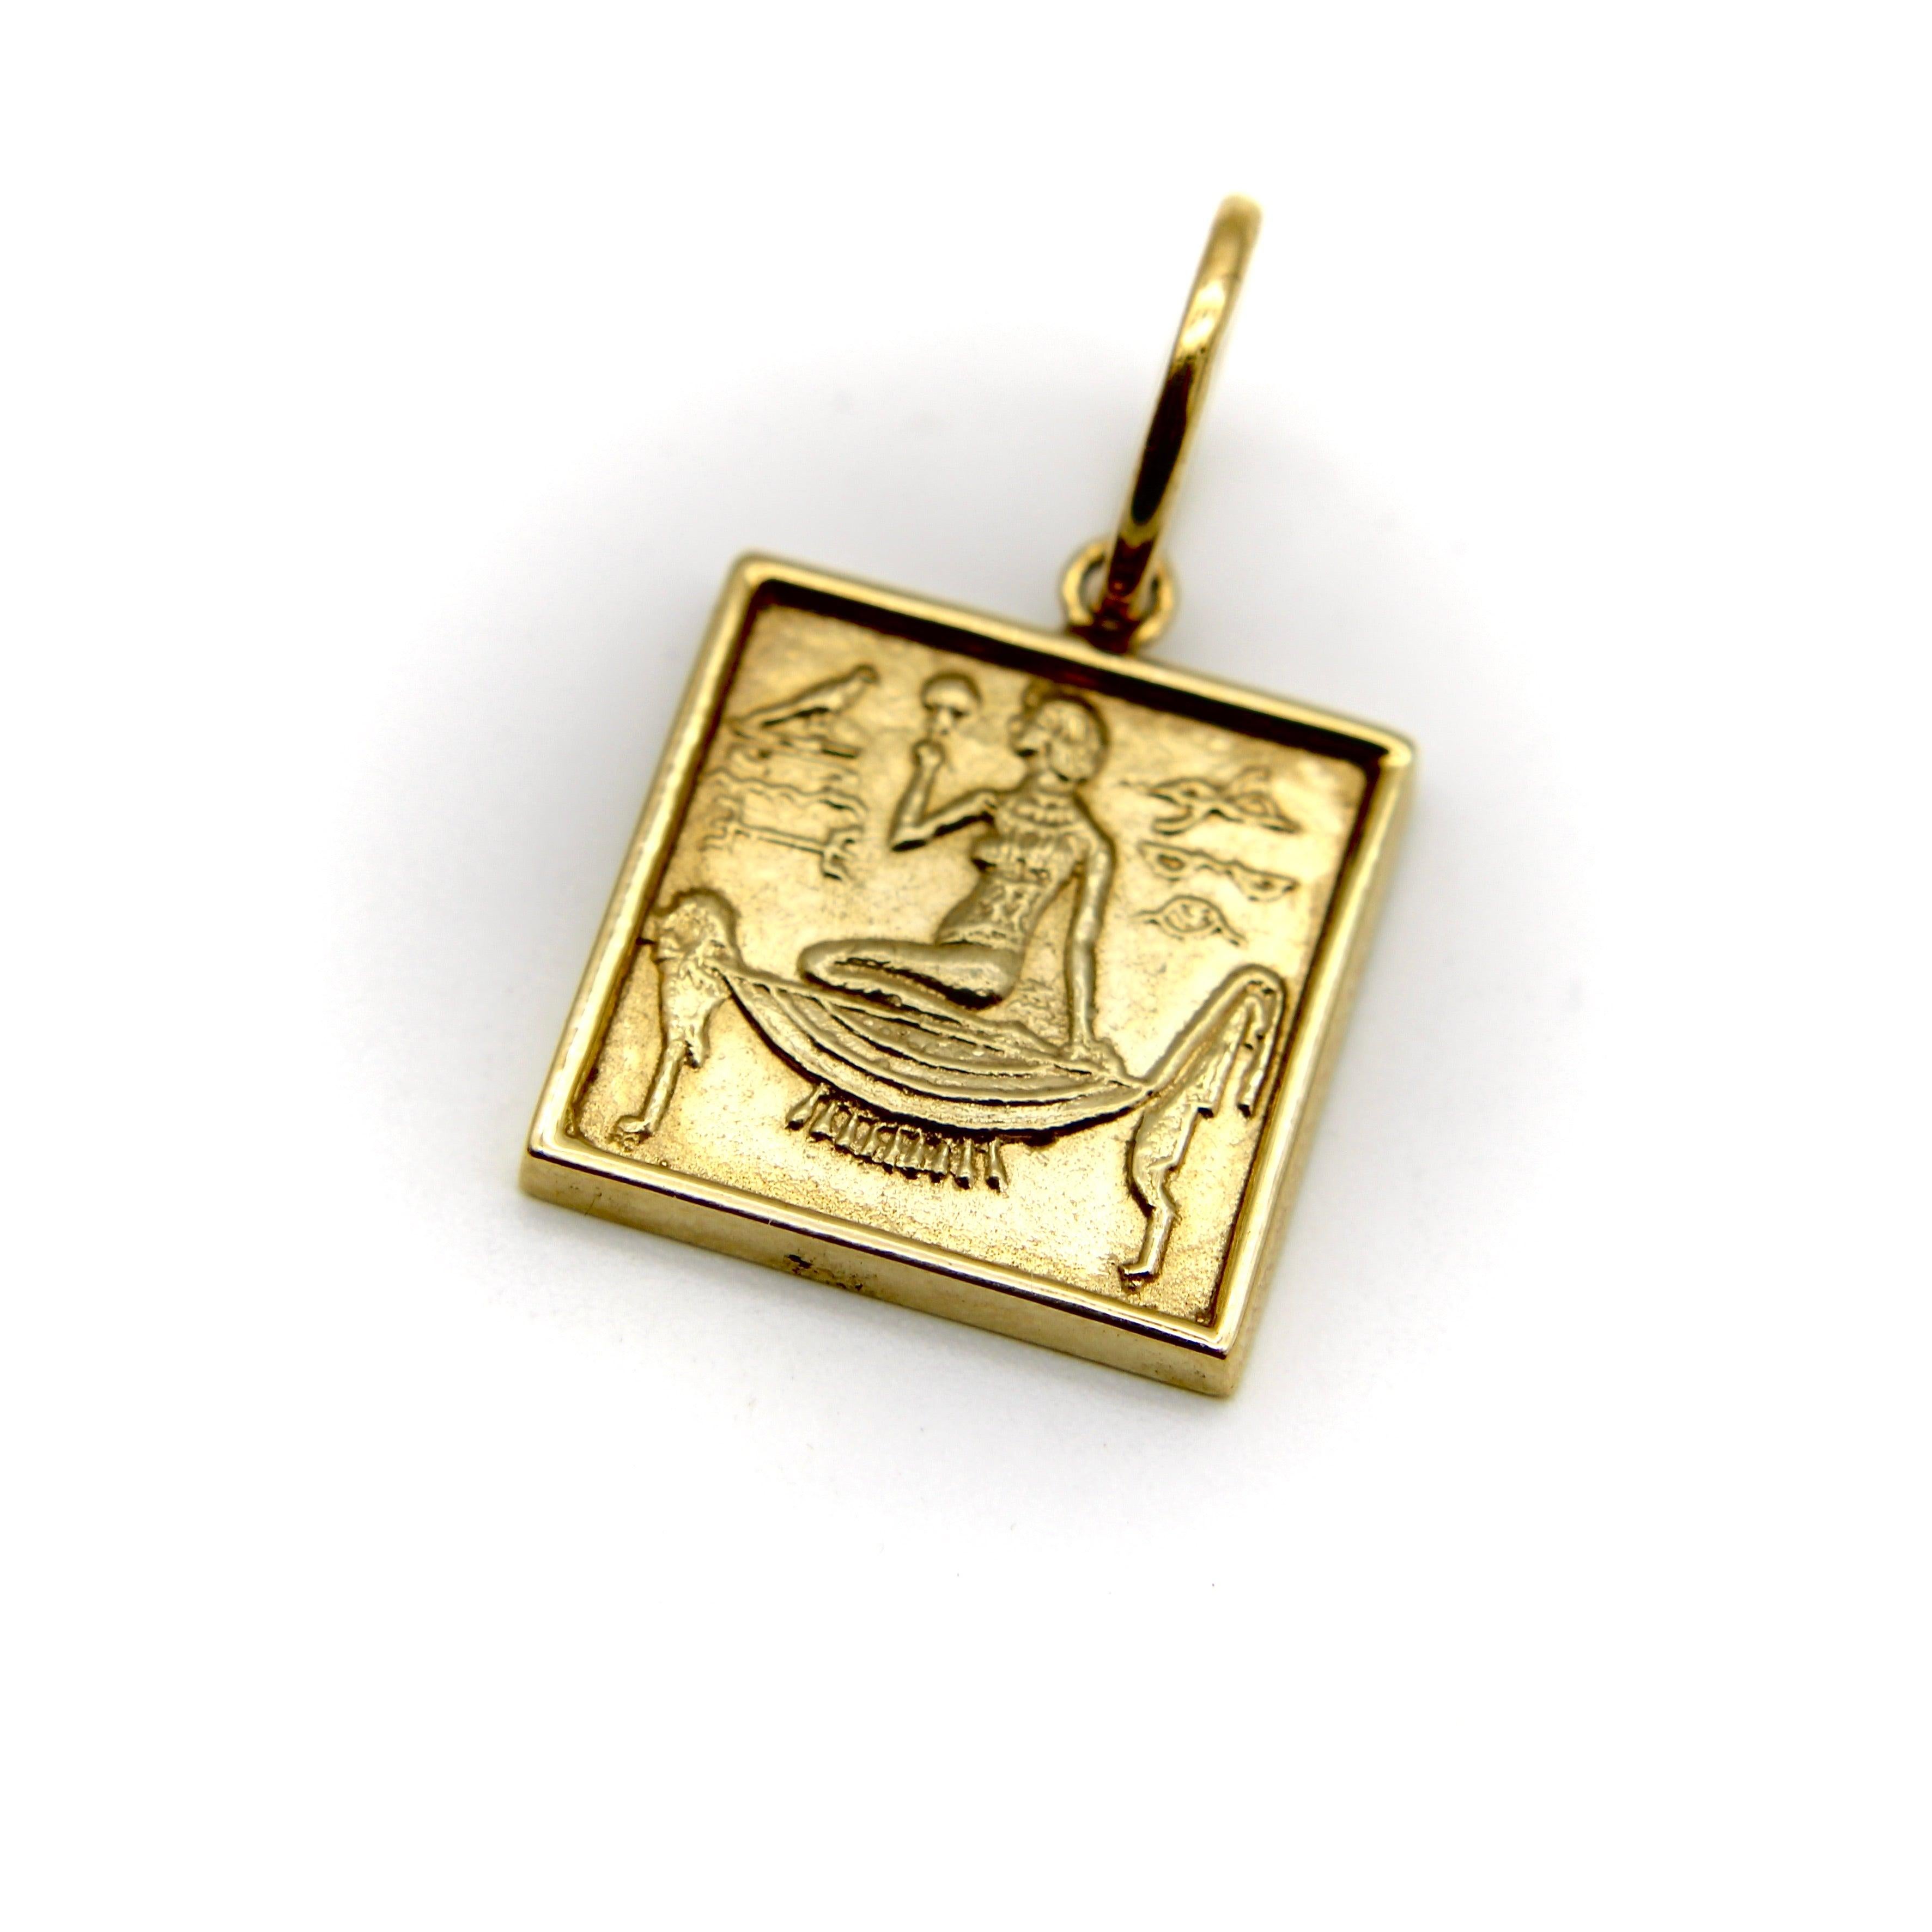 Part of our Cute as a Button Collection, Kirsten’s Corner created this charm by using a 1920’s button as a mold, and casting the piece in 14k gold. The button has a wonderful Egyptian Revival design: a goddess is pictured being lifted on a doglike,